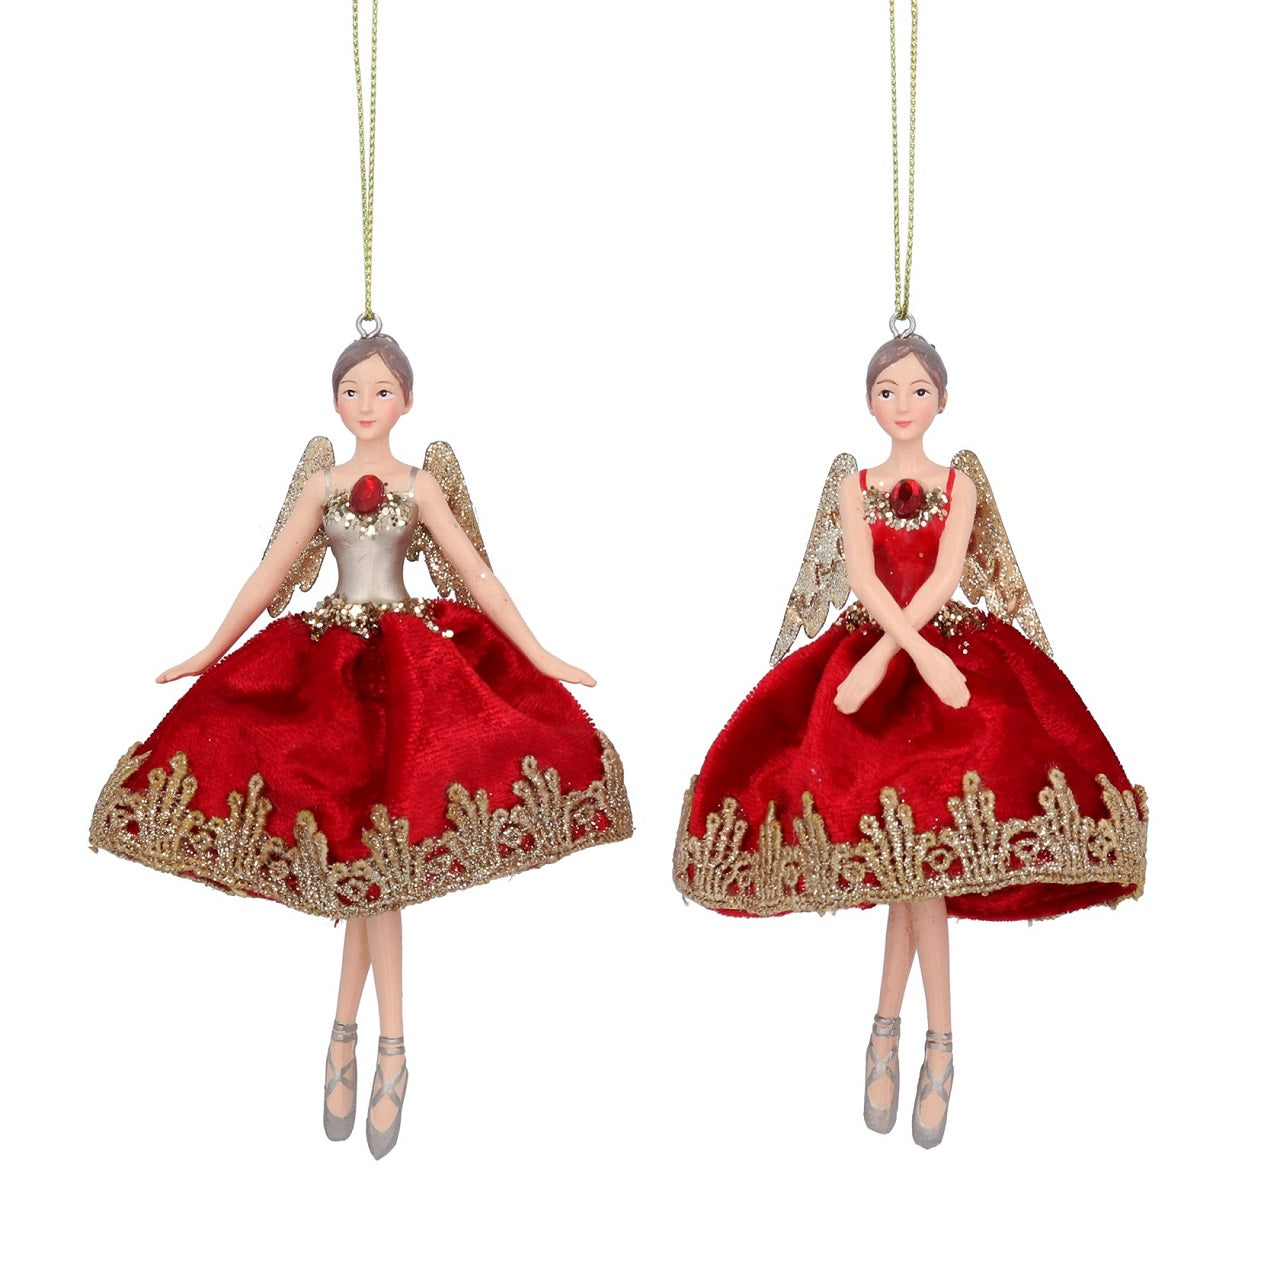 Gisela Graham Red & Gold Fabric Fairy Hanging Decoration - Red Top  Browse our beautiful range of luxury Christmas tree decorations and ornaments for your tree this Christmas.  Add style to your Christmas tree with this elegant Christmas fairy in red fabric dress decorated with gold trim and red stone.